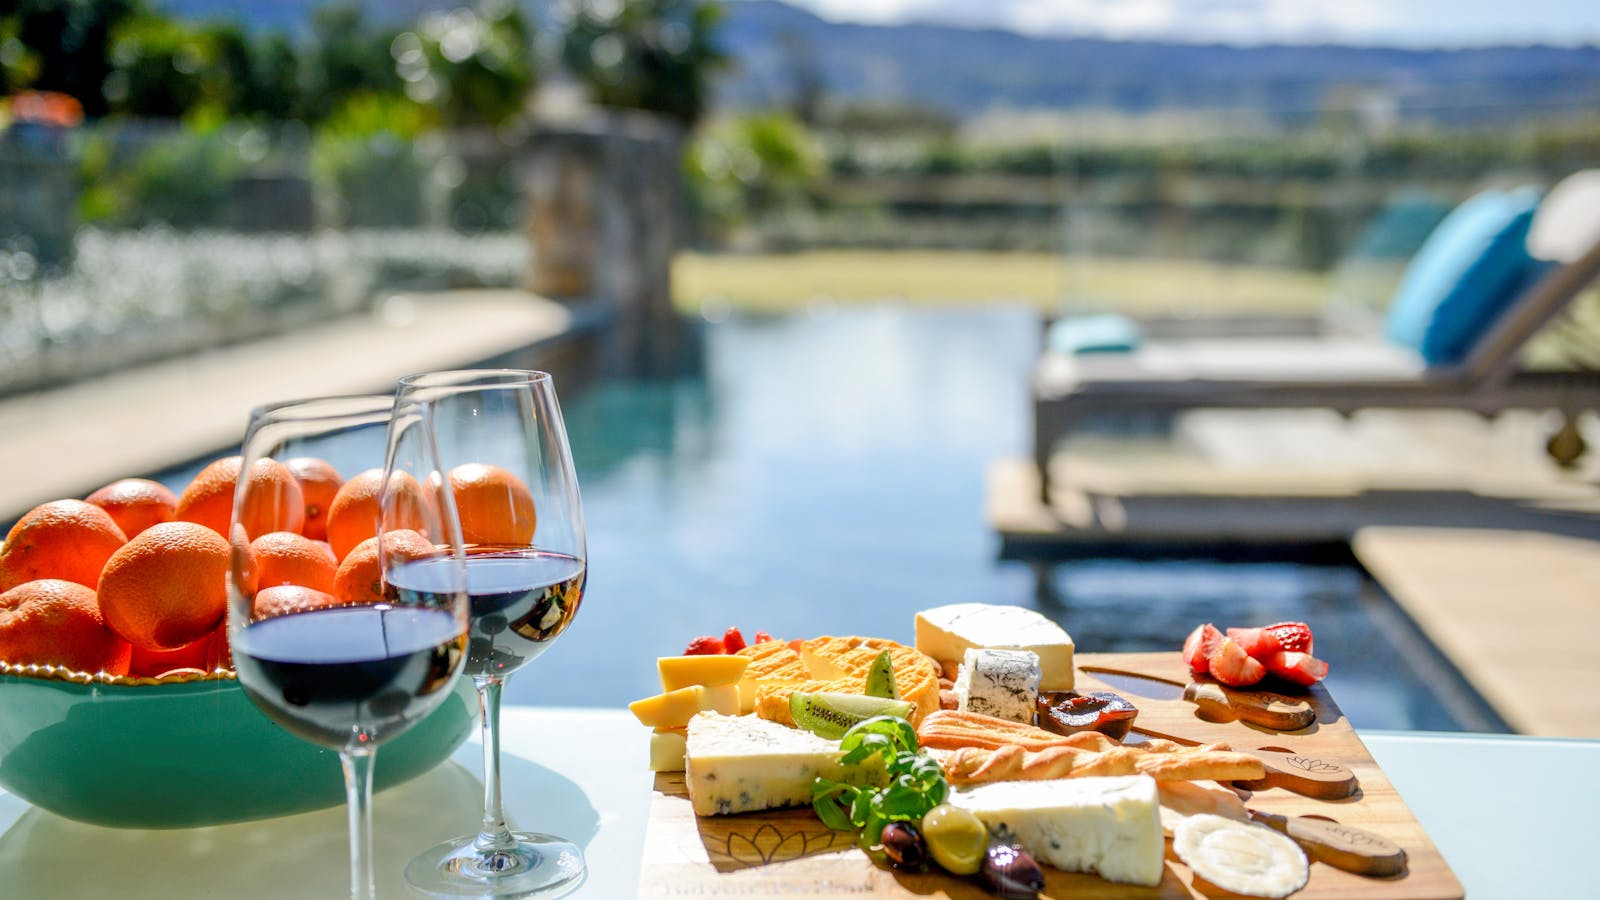 Why not relax poolside with a delicious cheese platter and wine!  Sounds good to me.